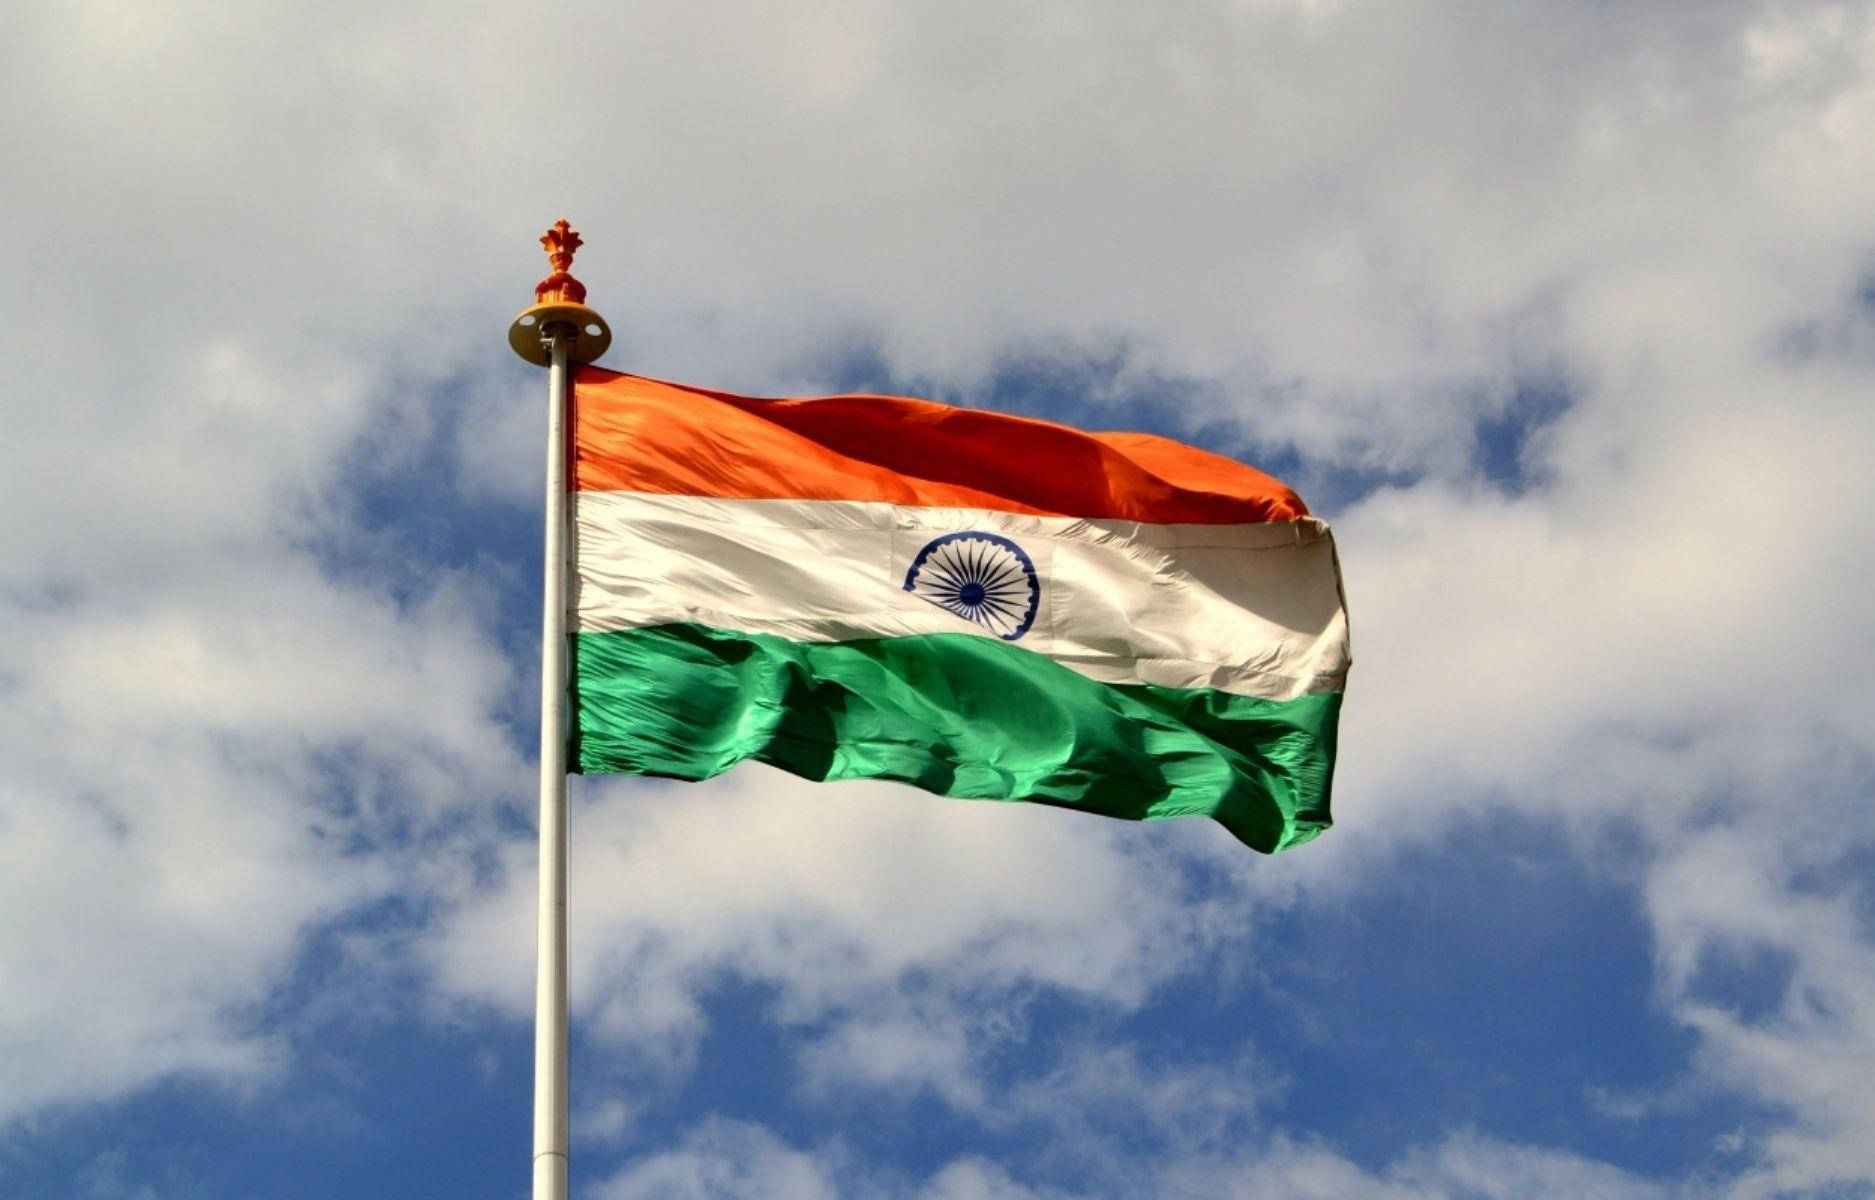 Real Indian Flag Hd In A Pole Picture